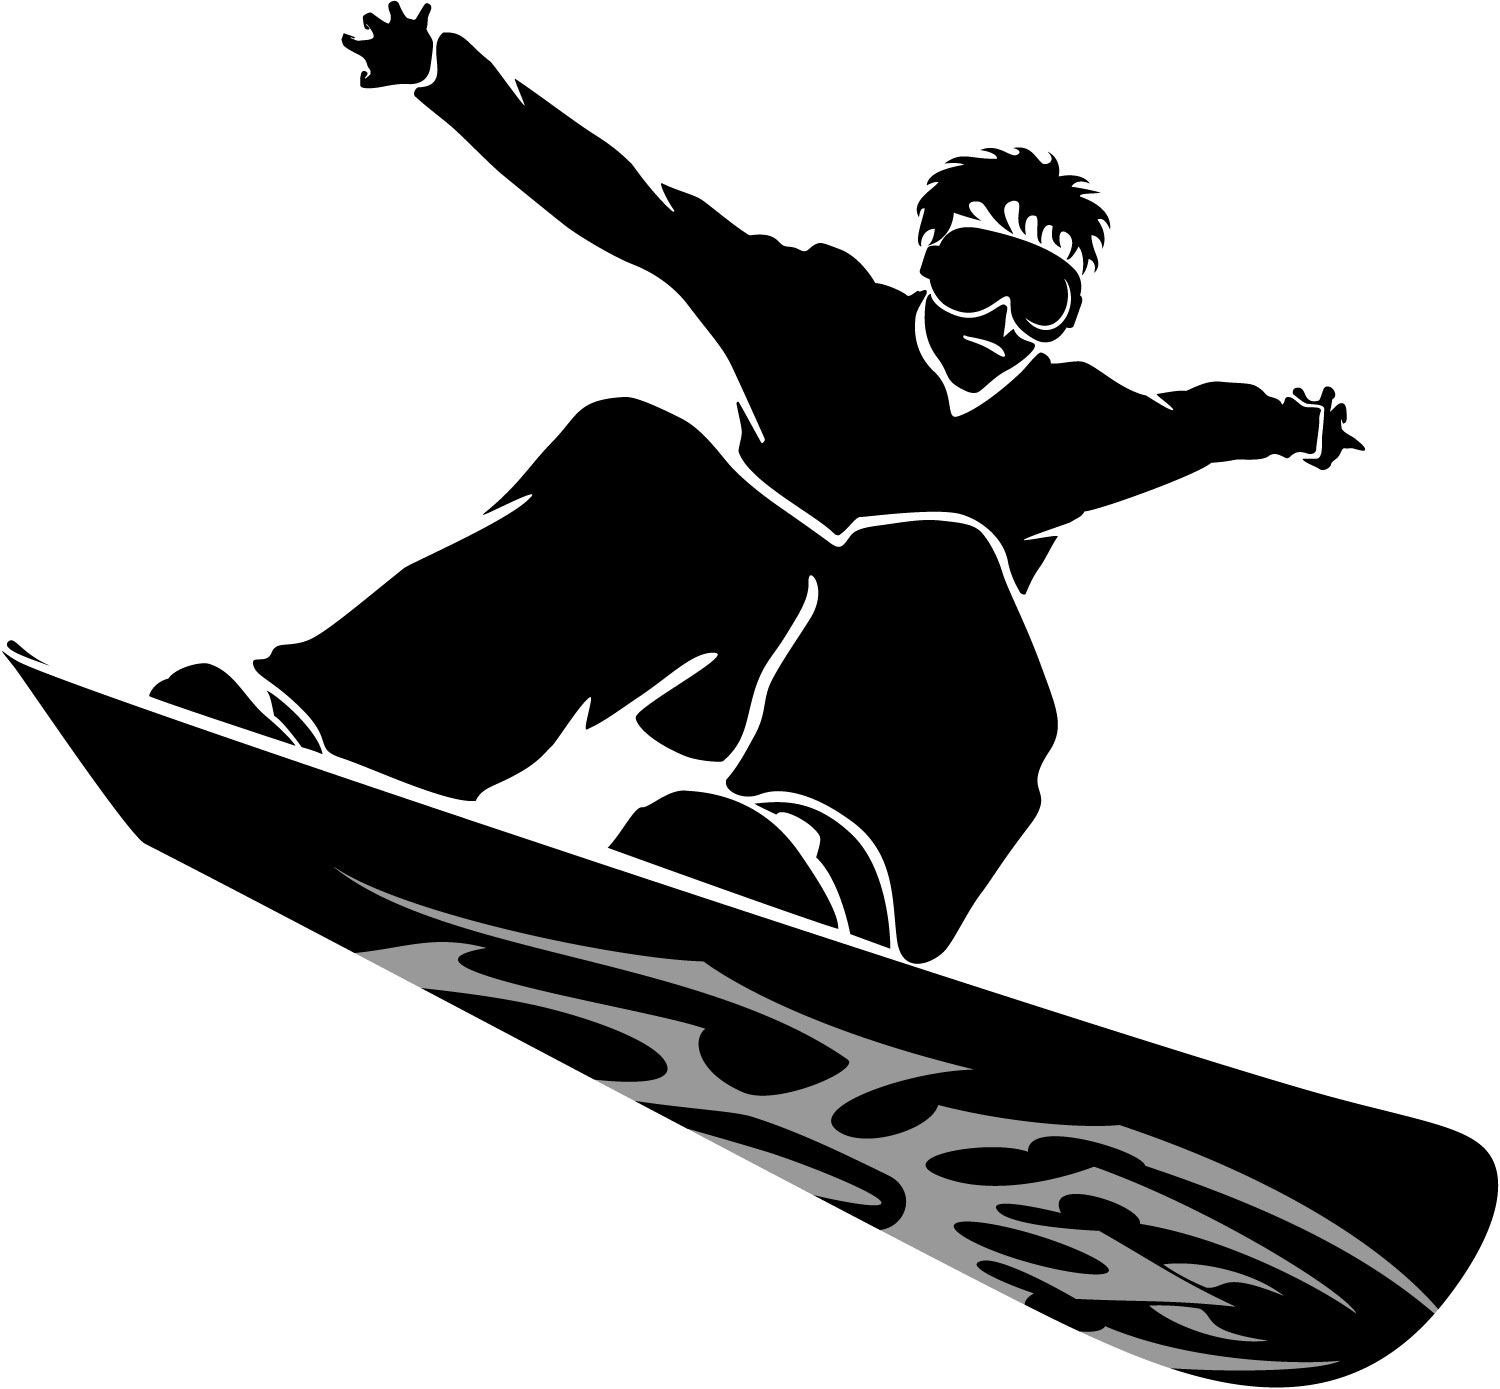 Skiing snowboarding clipart.